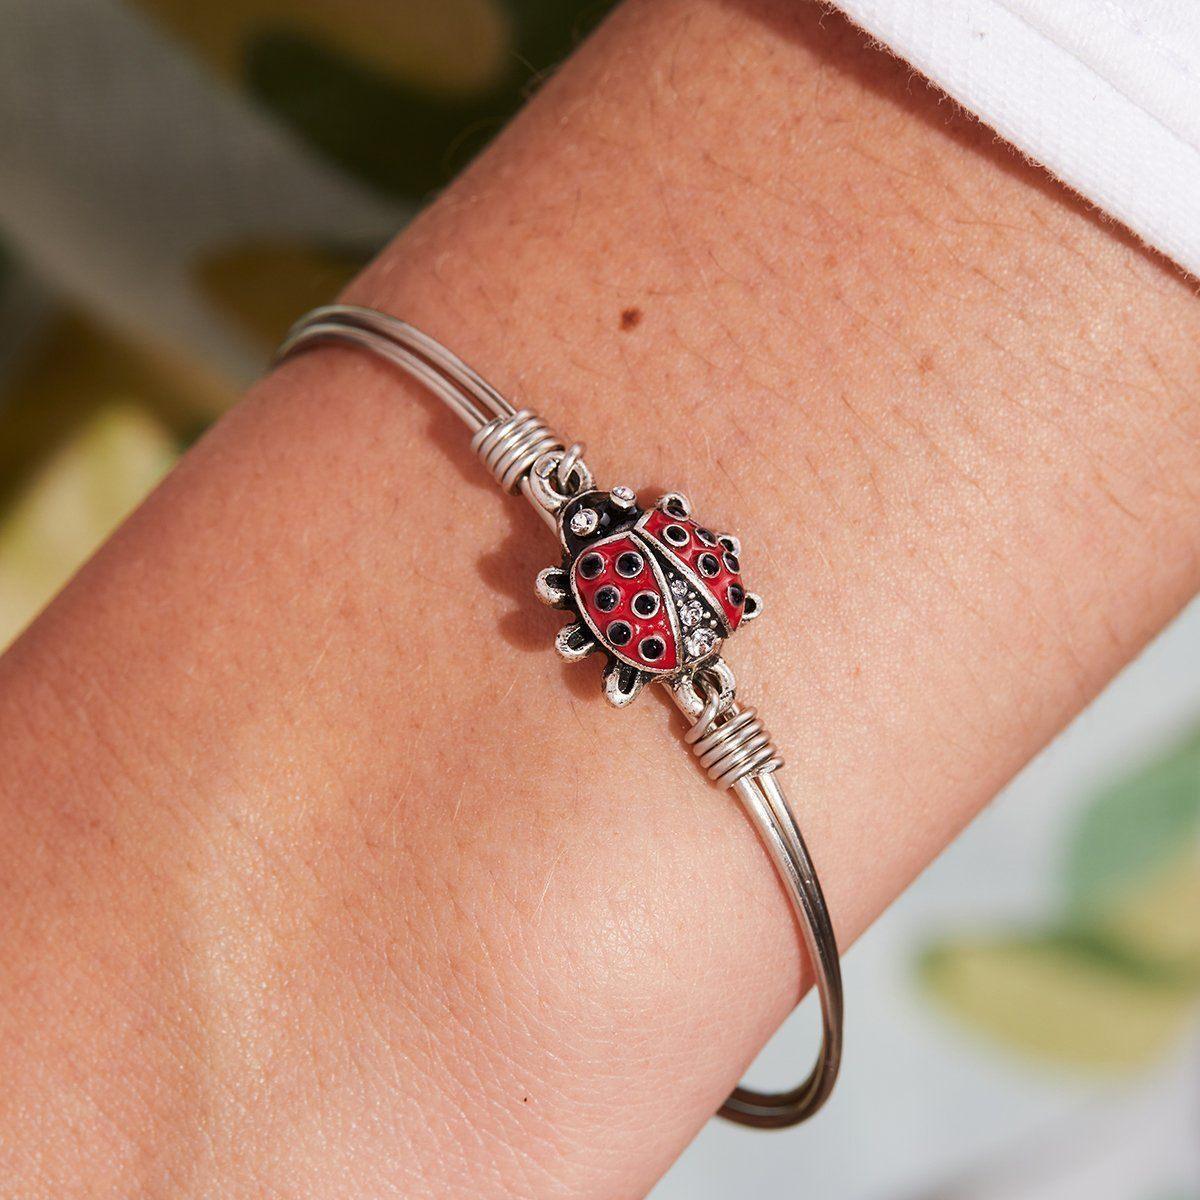 Luca + Danni Red Ladybug with Crystals Bangle Bracelet - Strawberry Moon Boutique